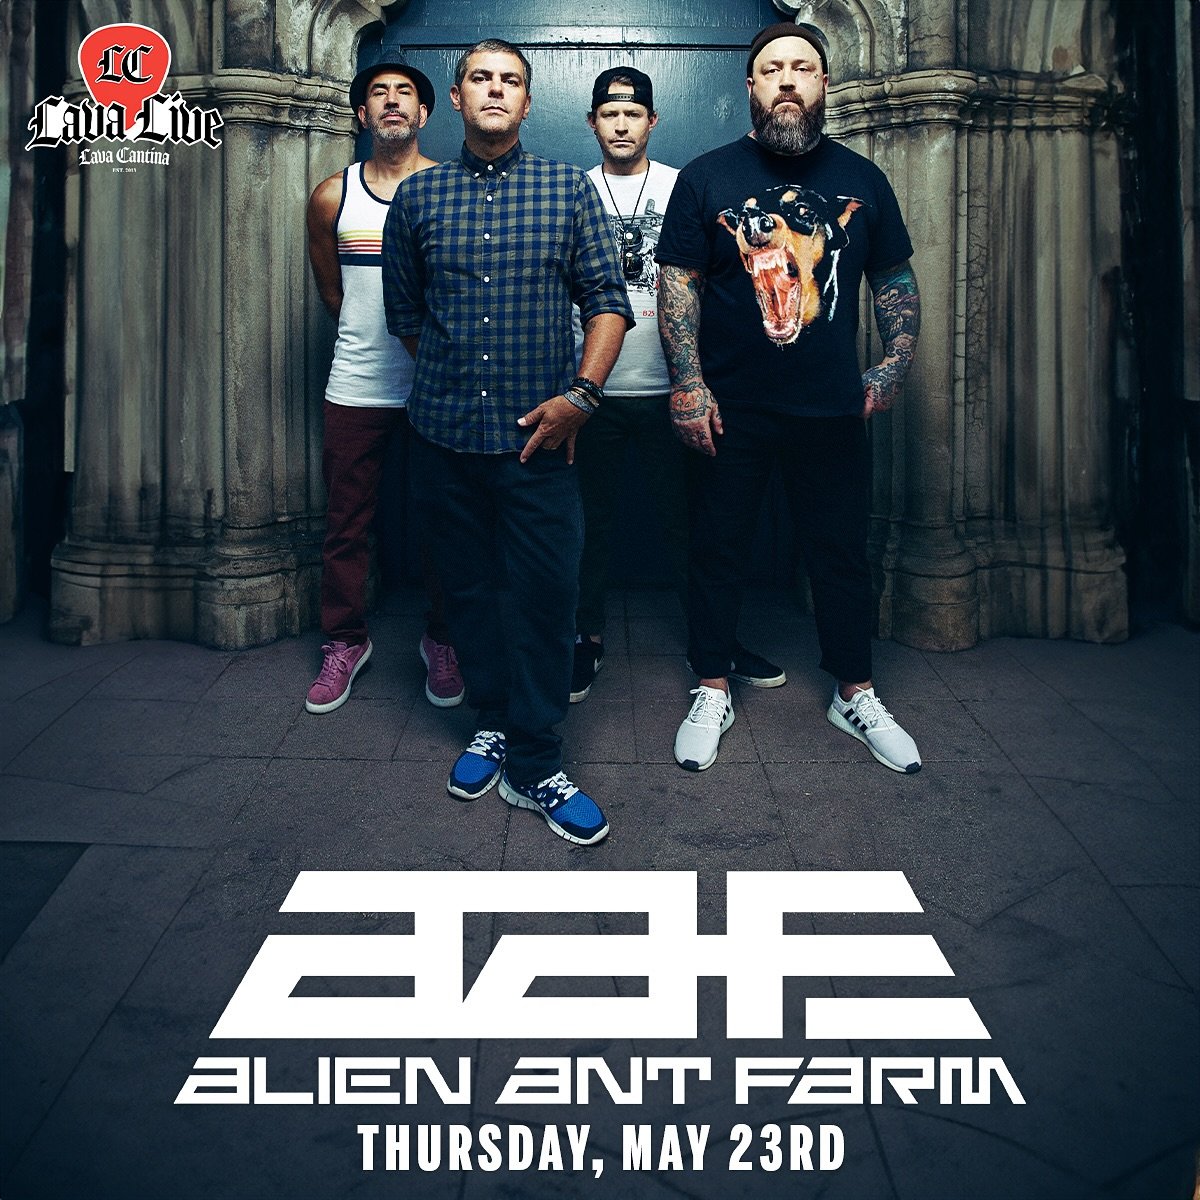 🚨 THURSDAY, MAY 23RD @lavacantinatc 🚨

ALIEN ANT FARM
with AND THE HERO PREVAILS
🔥Lava Live at Lava Cantina
Doors 5:30 PM | Concert 7:00 PM
AGES: All Ages
🎟️🎟️➡️ https://tinyurl.com/4kr85z5j

EMO NIGHT BROOKLYN
EMO Pop Up Party!
💀Lava Cantina&r